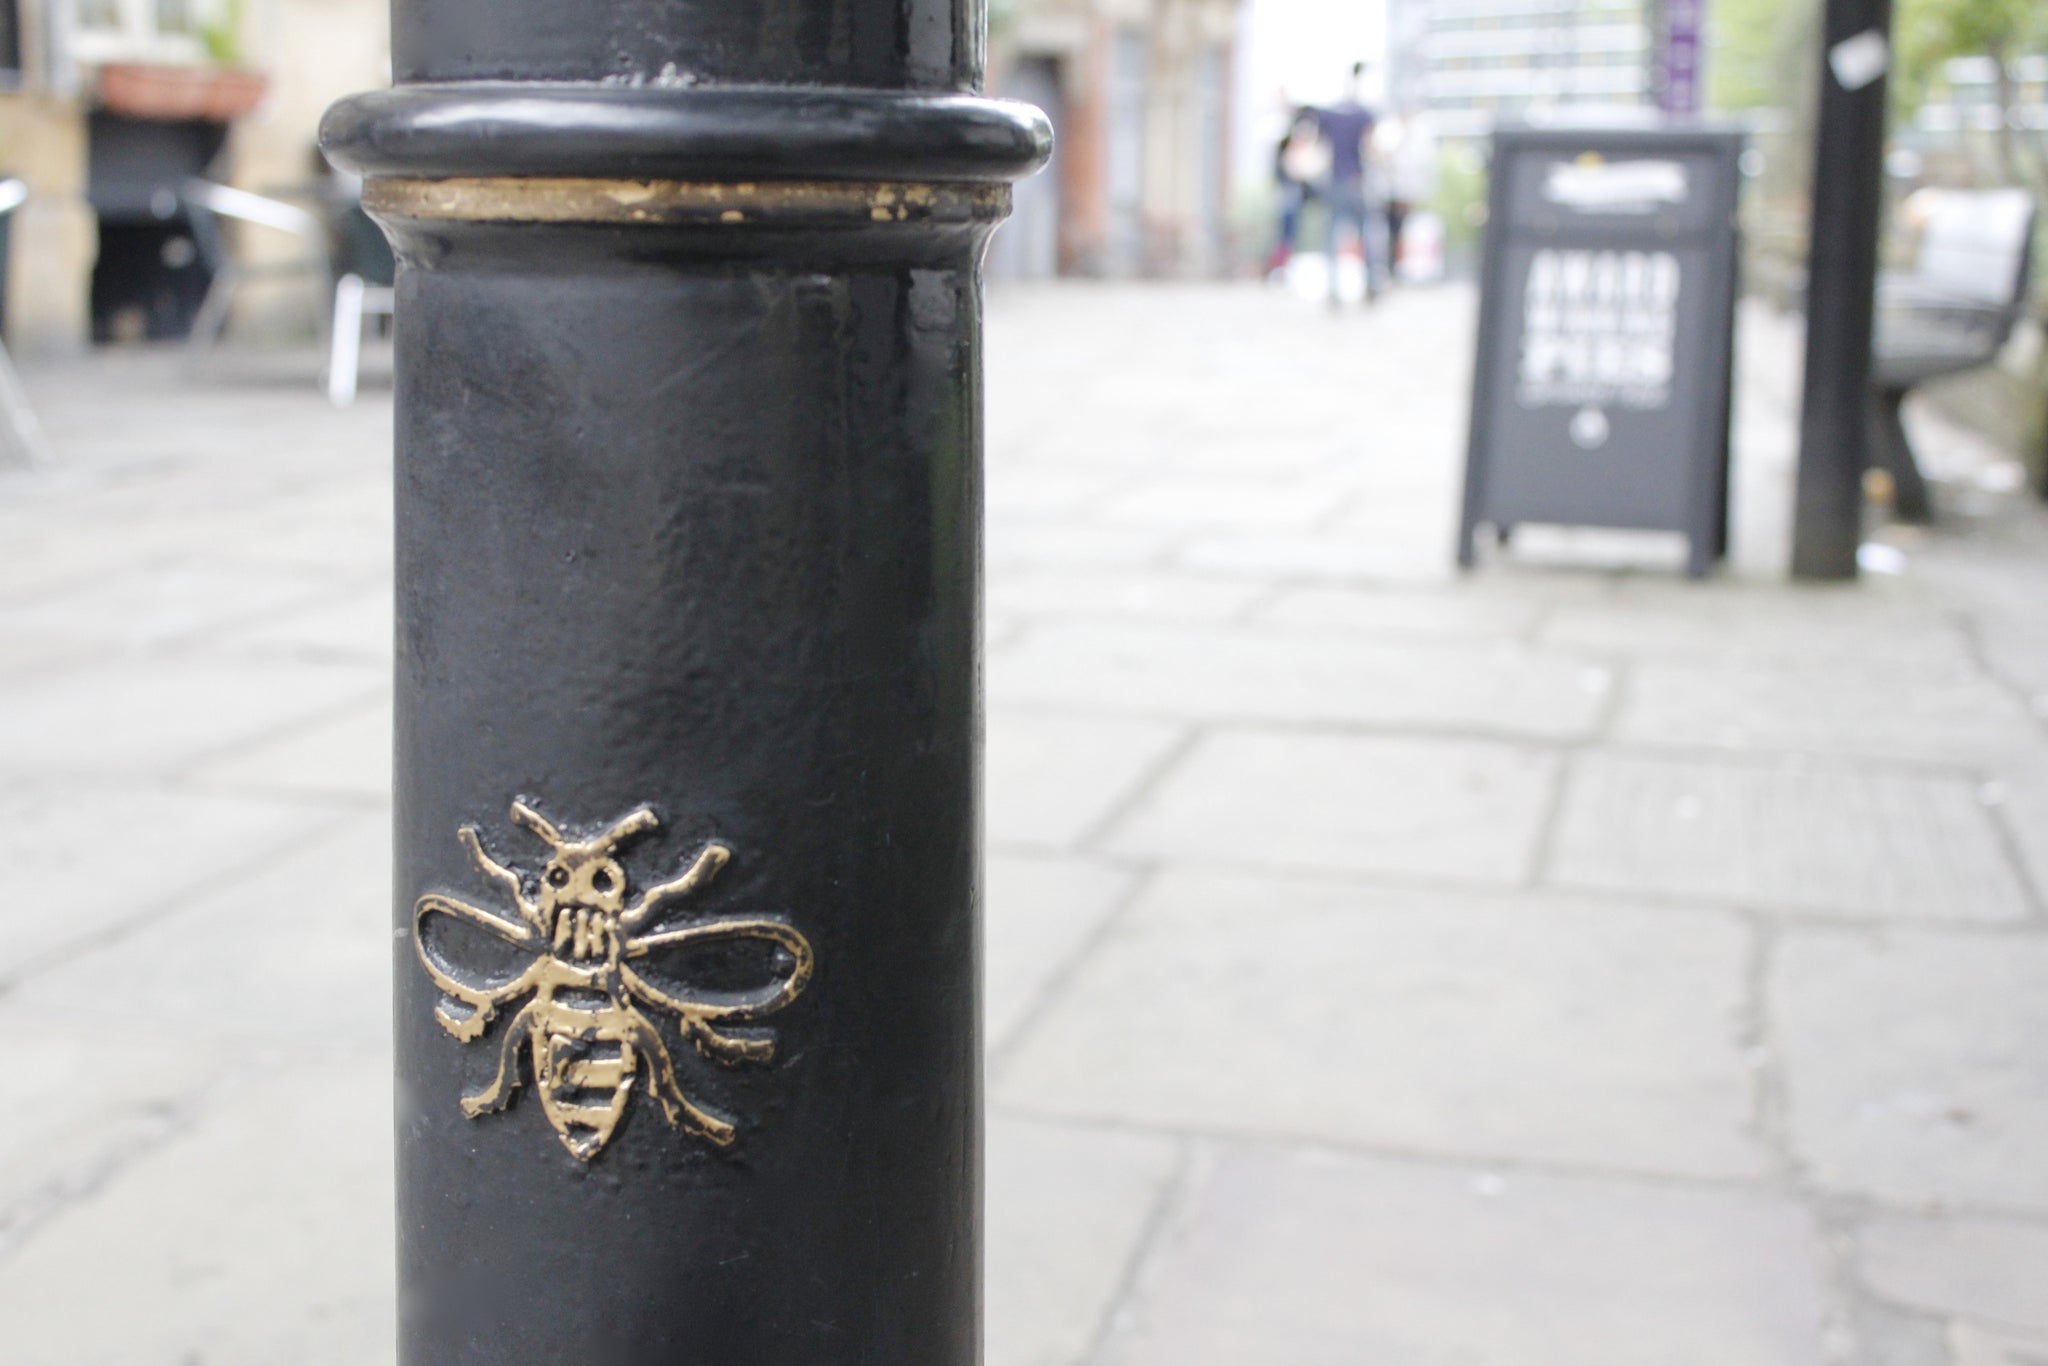 Manchester Bee Lamppost